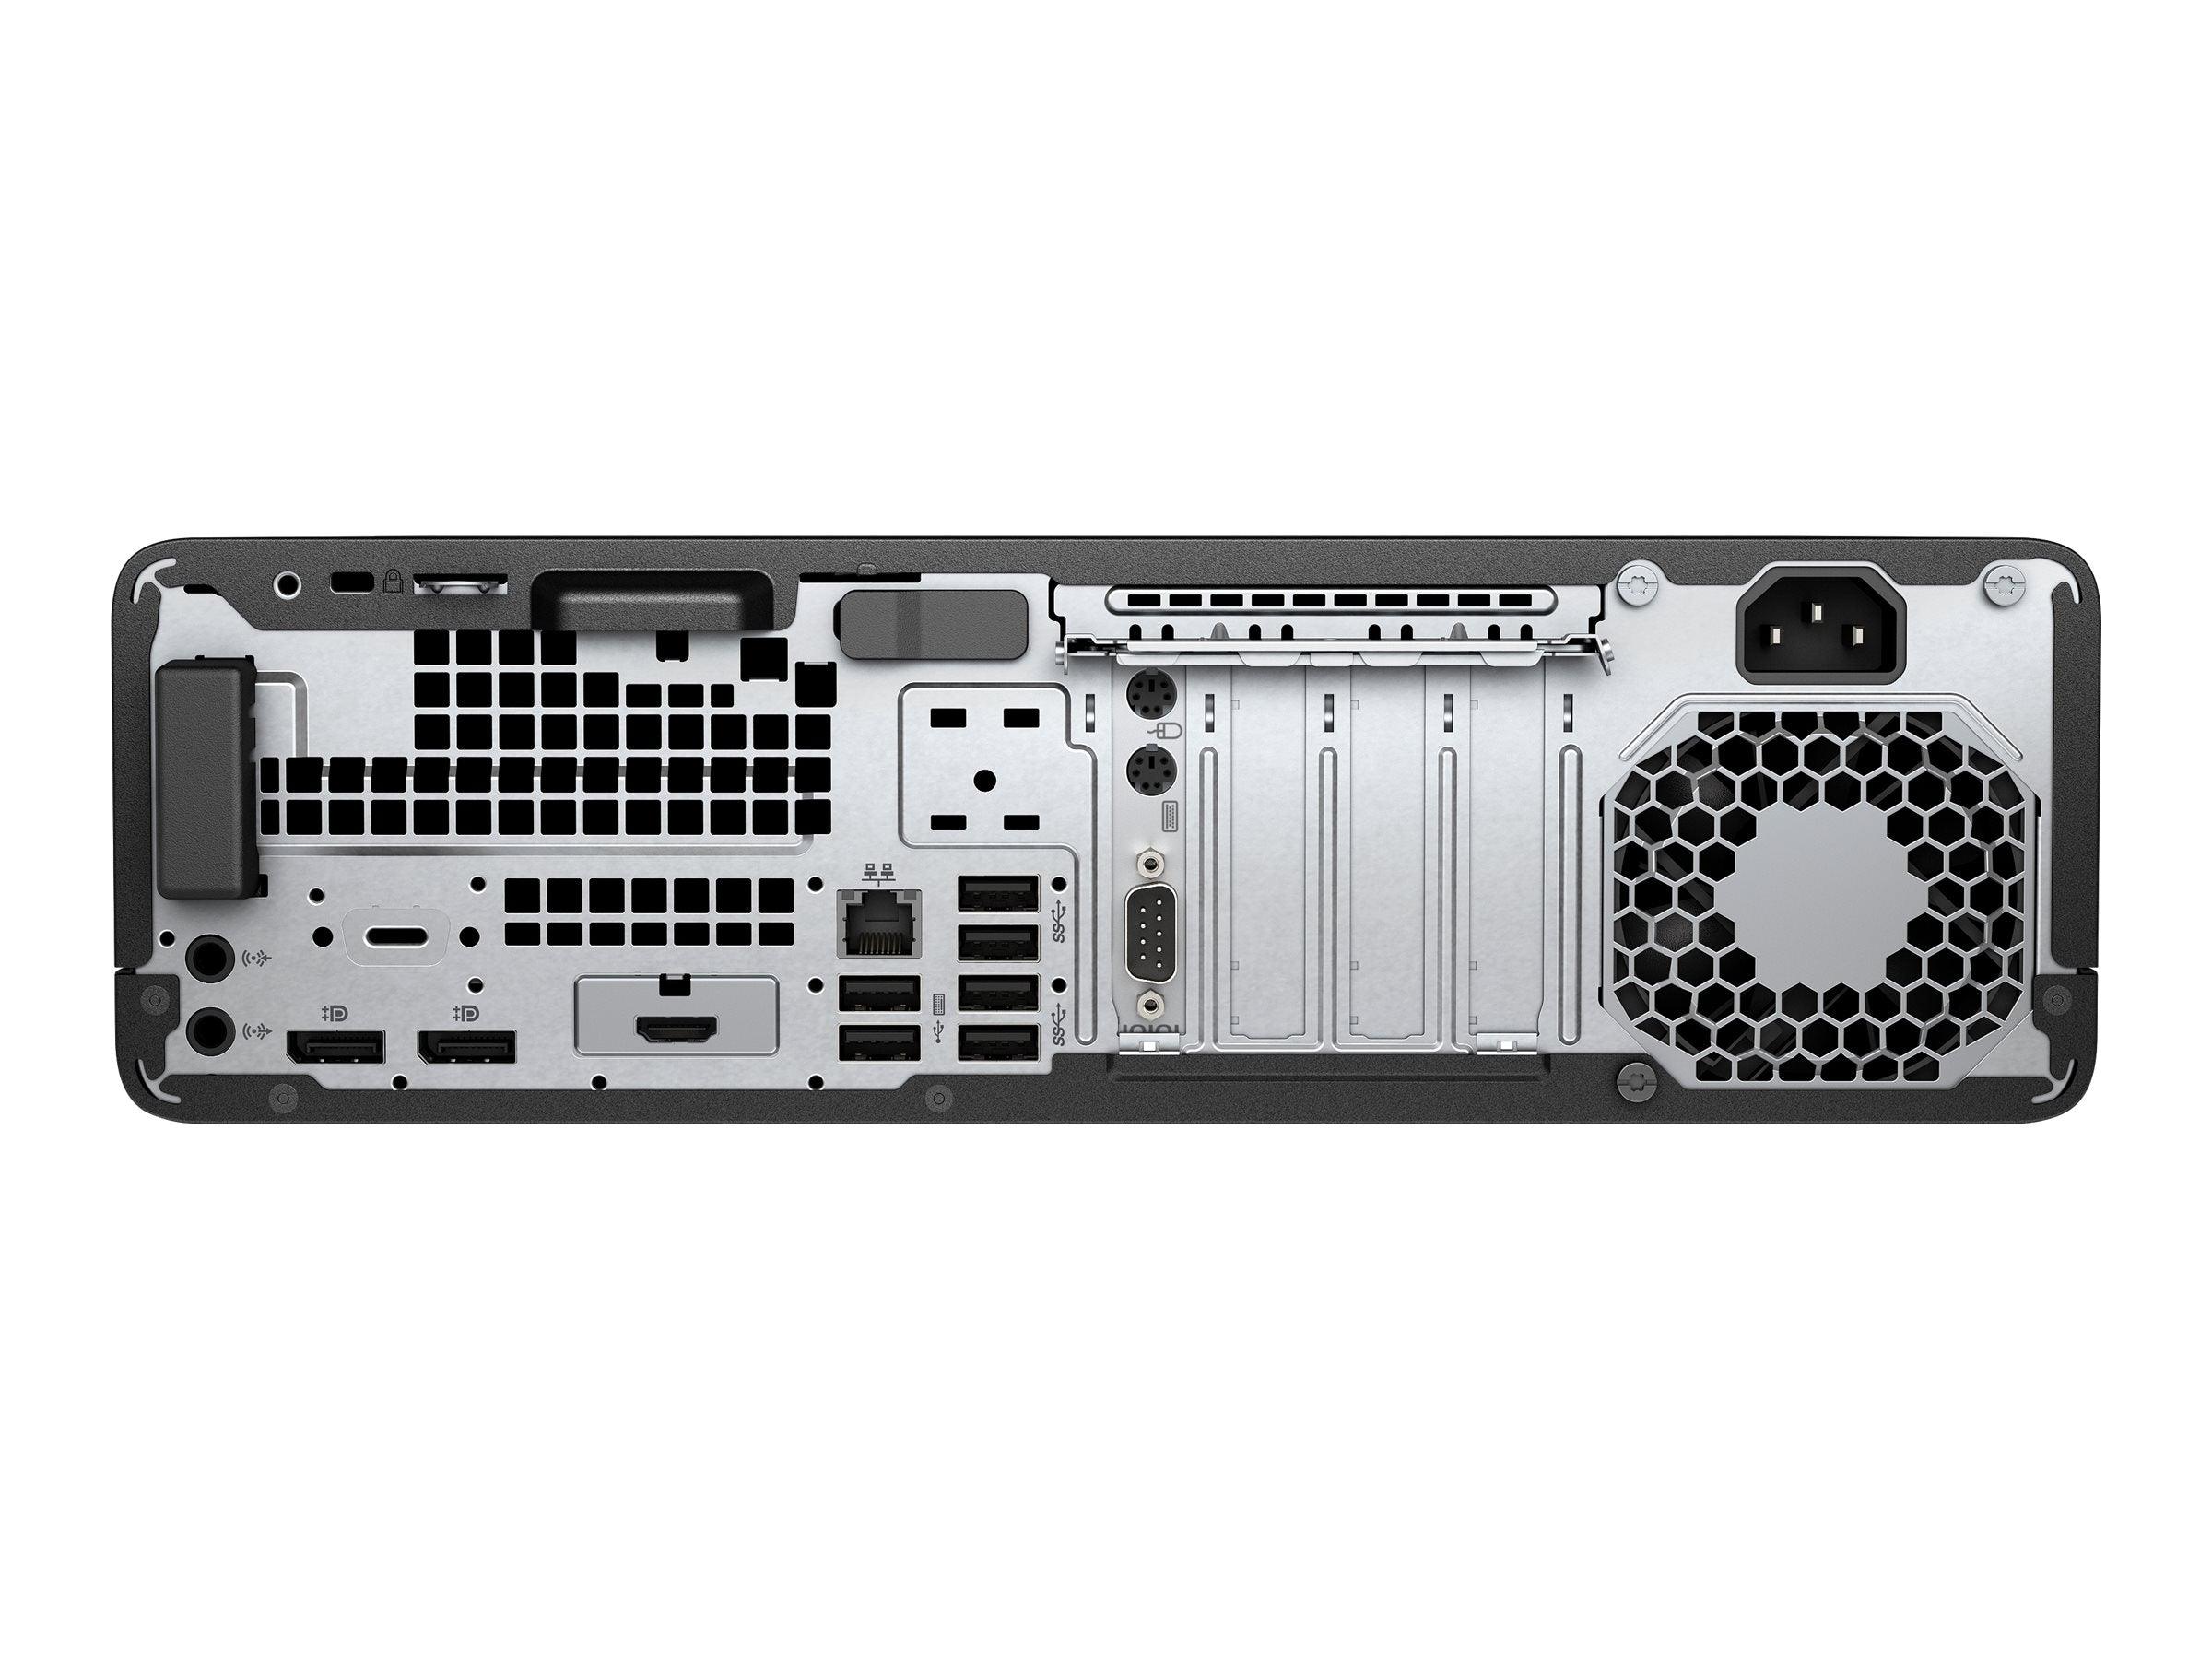 (NEW VENDOR) HP 6N0X7PA#AB5 Elite Desk SFF 800 G9, Q670 Chipset, i5-12500, 8GB DDR5-4800, 512GB M.2 PCIe NVMe SSD, ODD, 11*USB Ports, 2*DP+1*HDMI, 2*Serial, Eng USB KB/Mouse, Int-Speaker, W11P DG, 3 Years On-site Wty